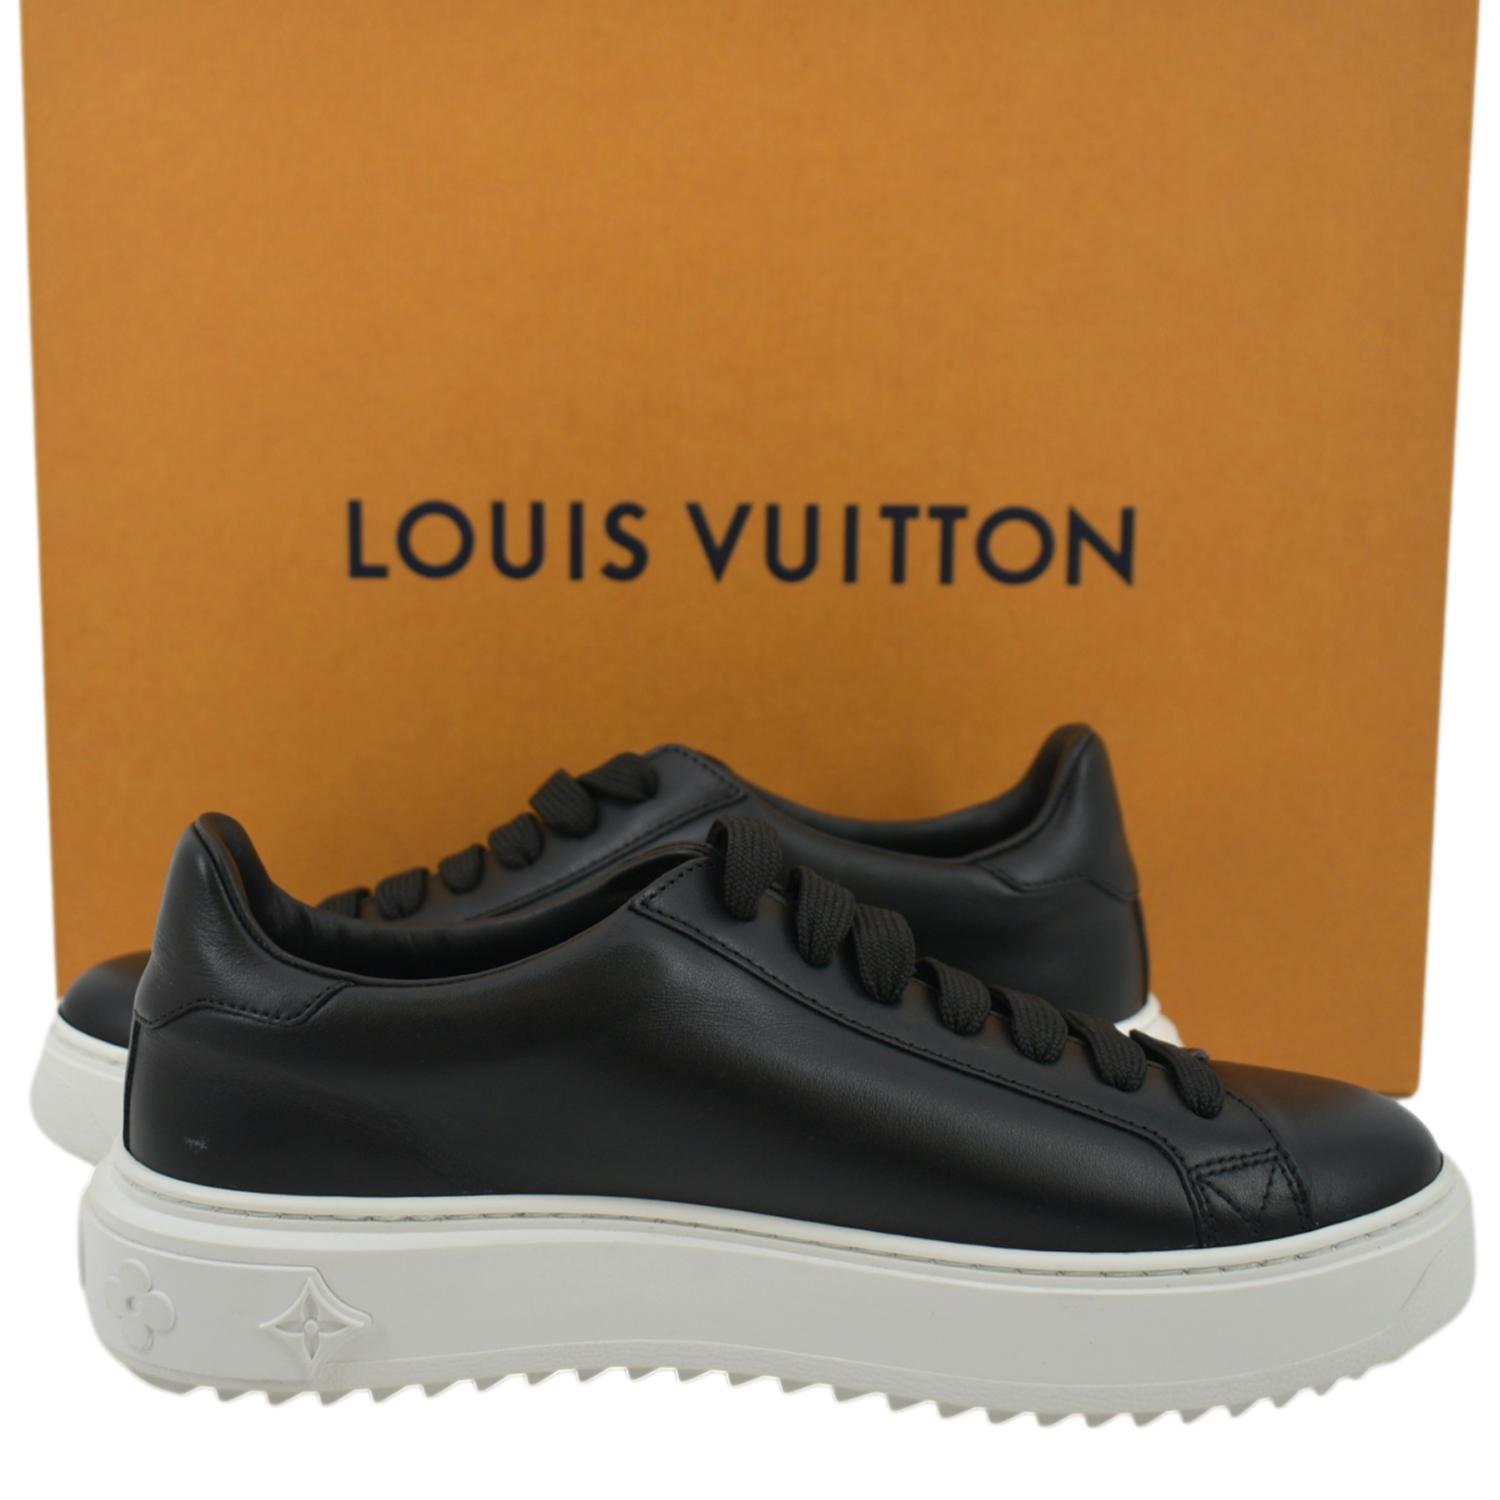 Louis Vuitton Time Out Leather Sneakers Black Size 37 1/2